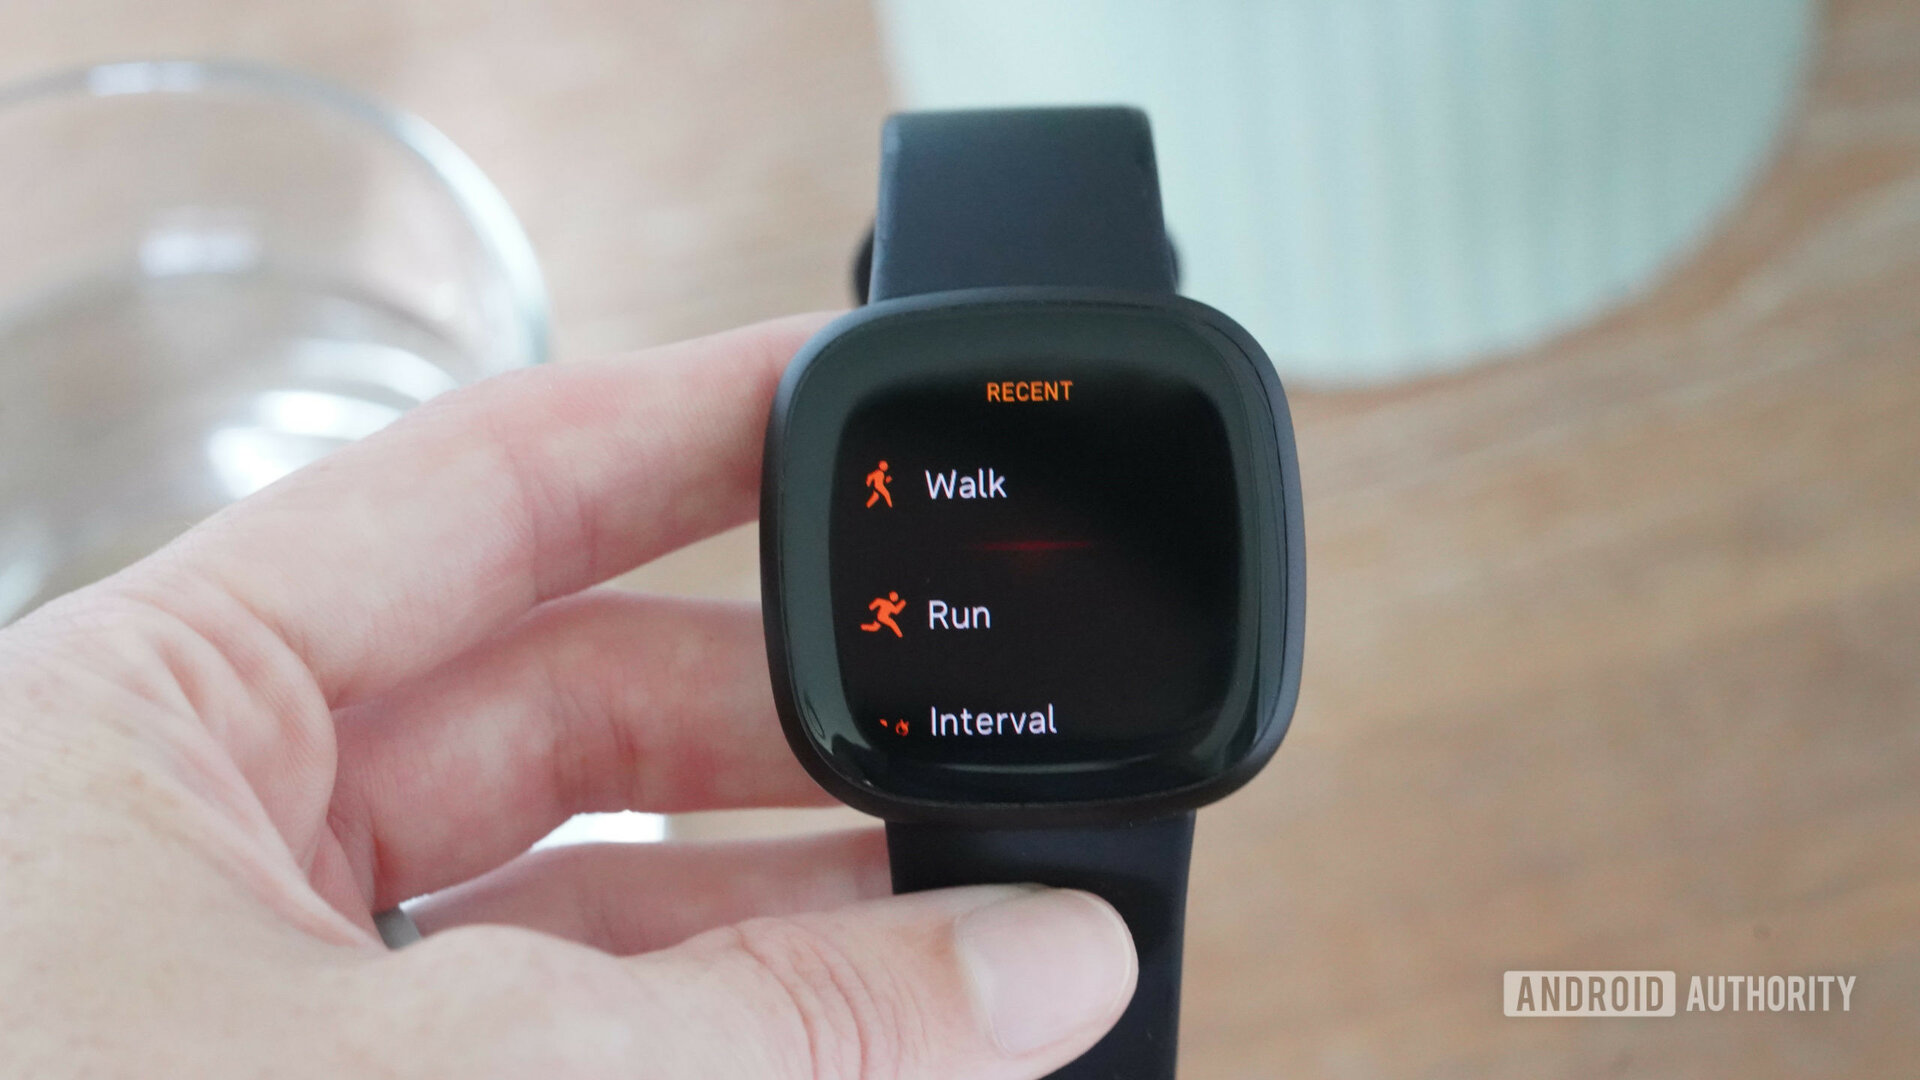 A user reviews the activity options on their Fitbit Versa 3.